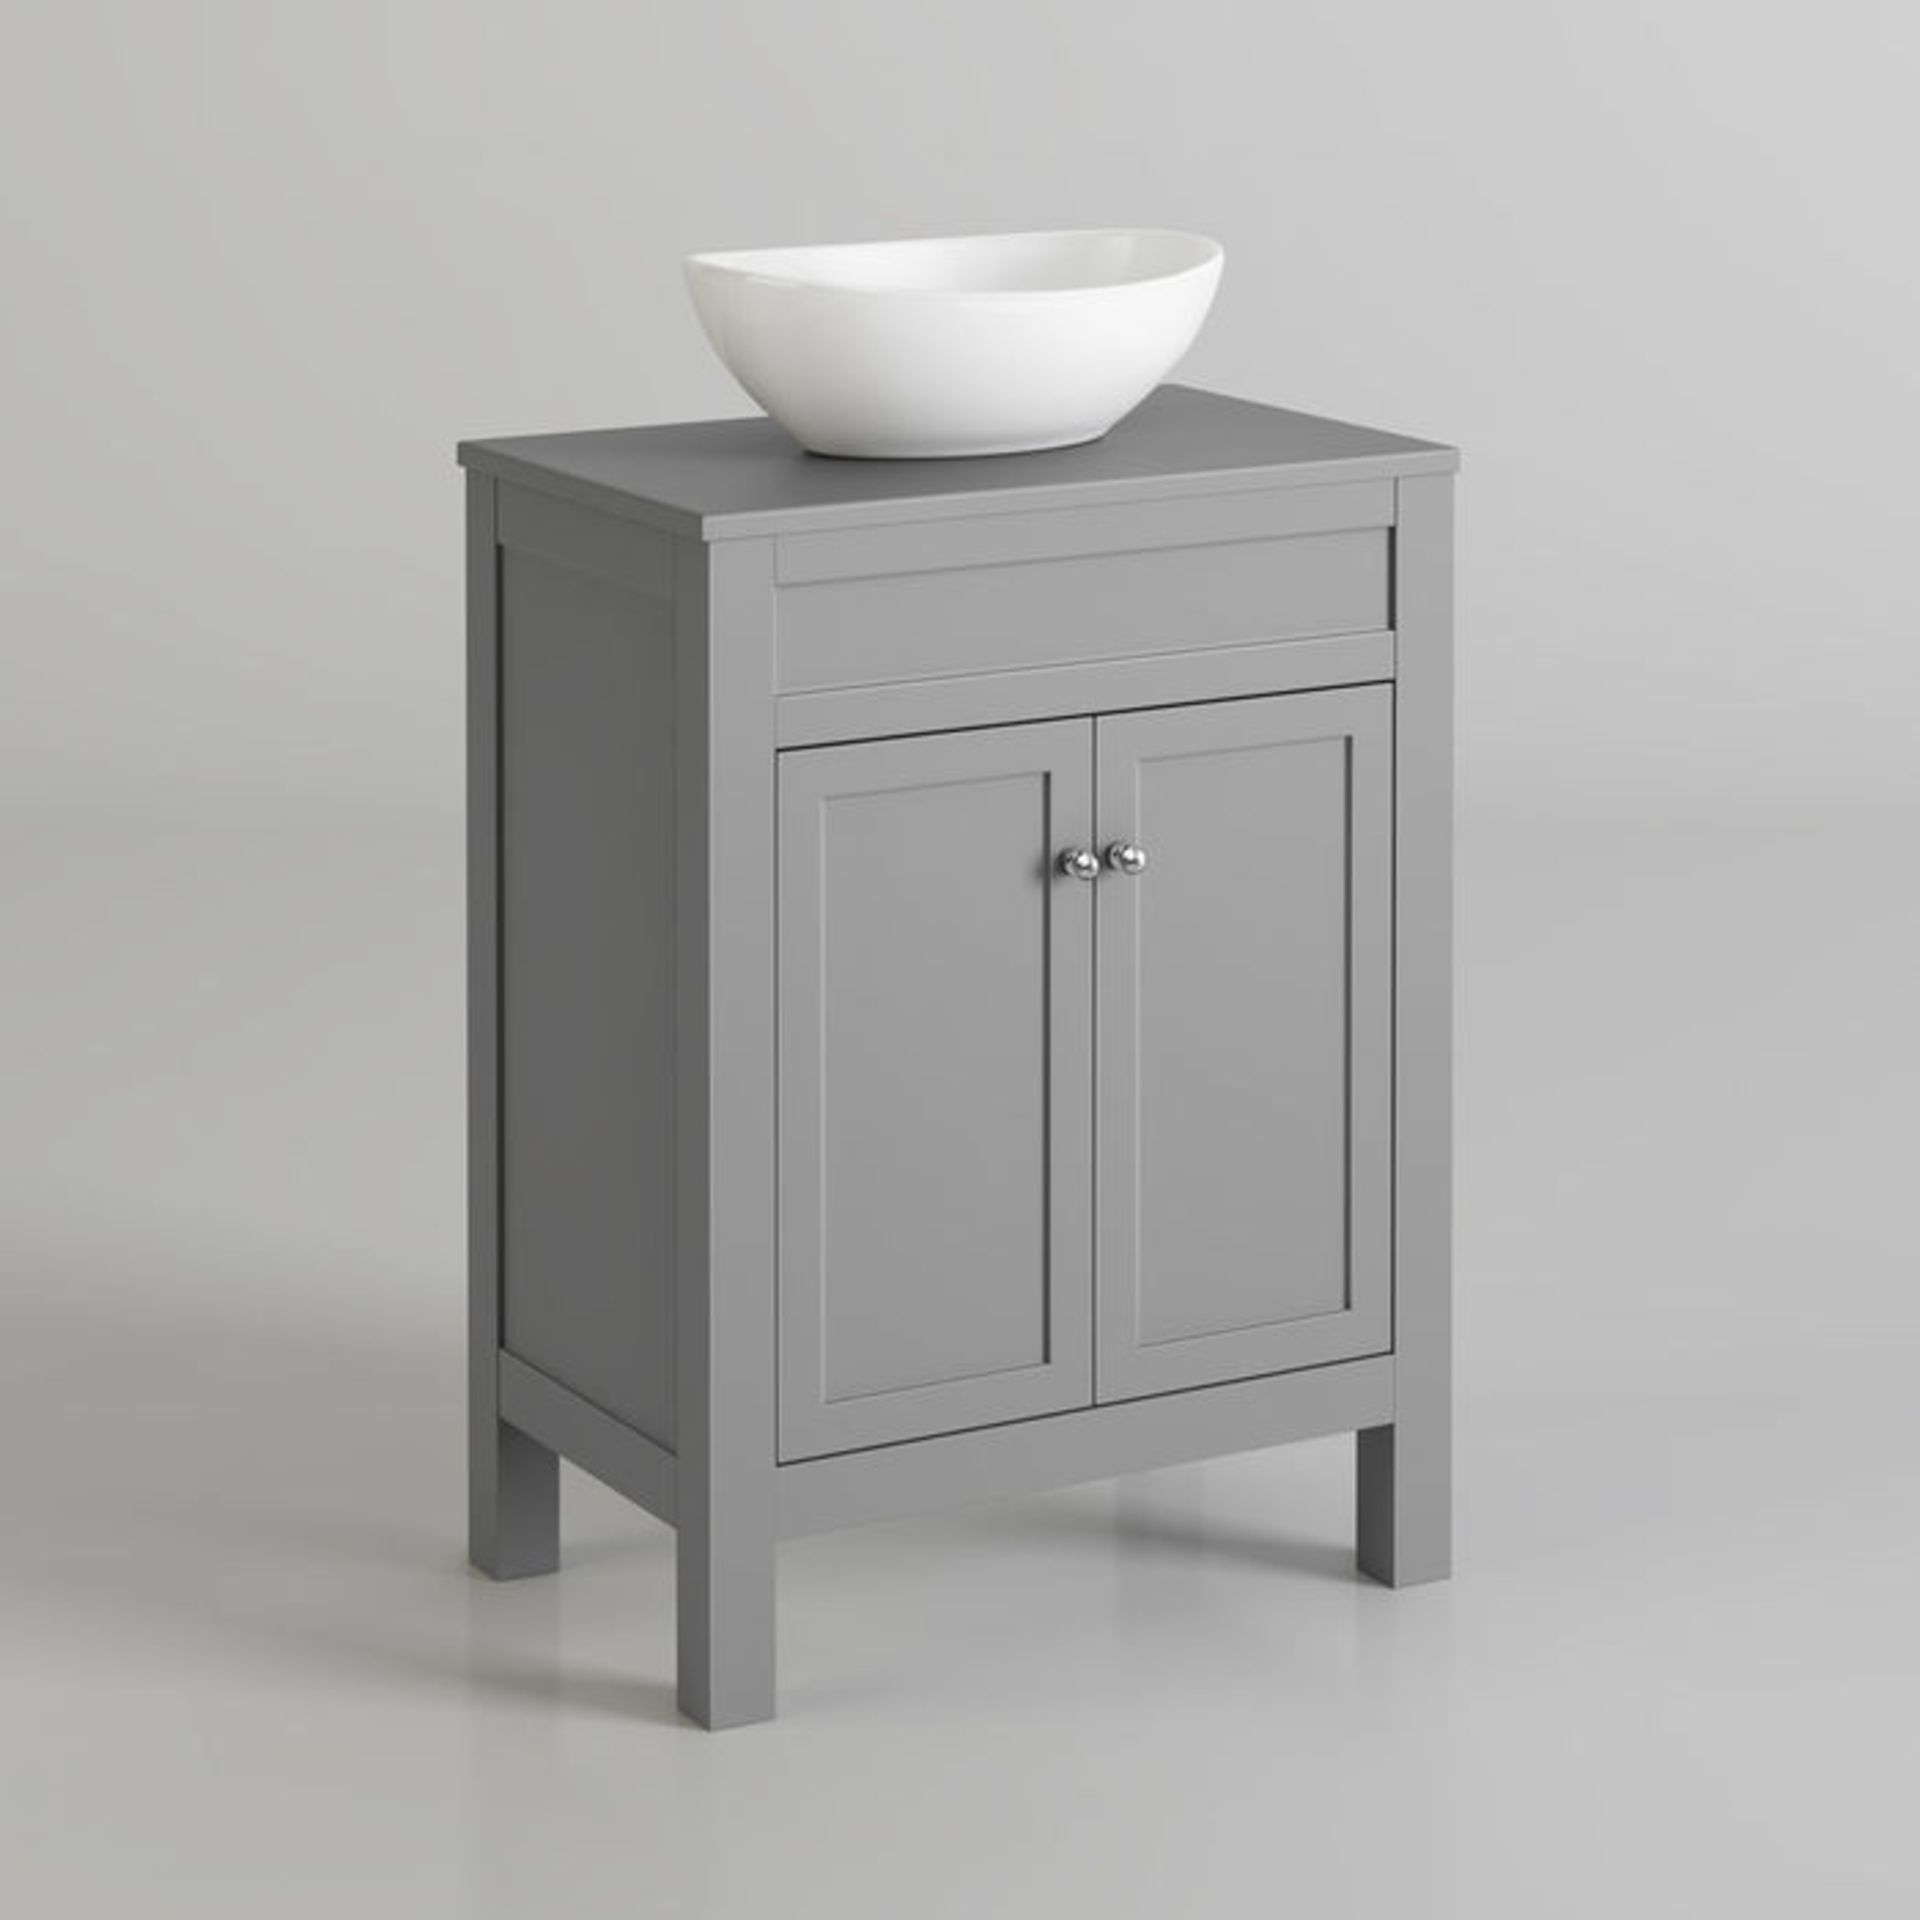 (KL87) 600mm Melbourne Grey Countertop Unit and Camila Basin - Floor Standing. RRP £499.99. Comes - Image 5 of 5